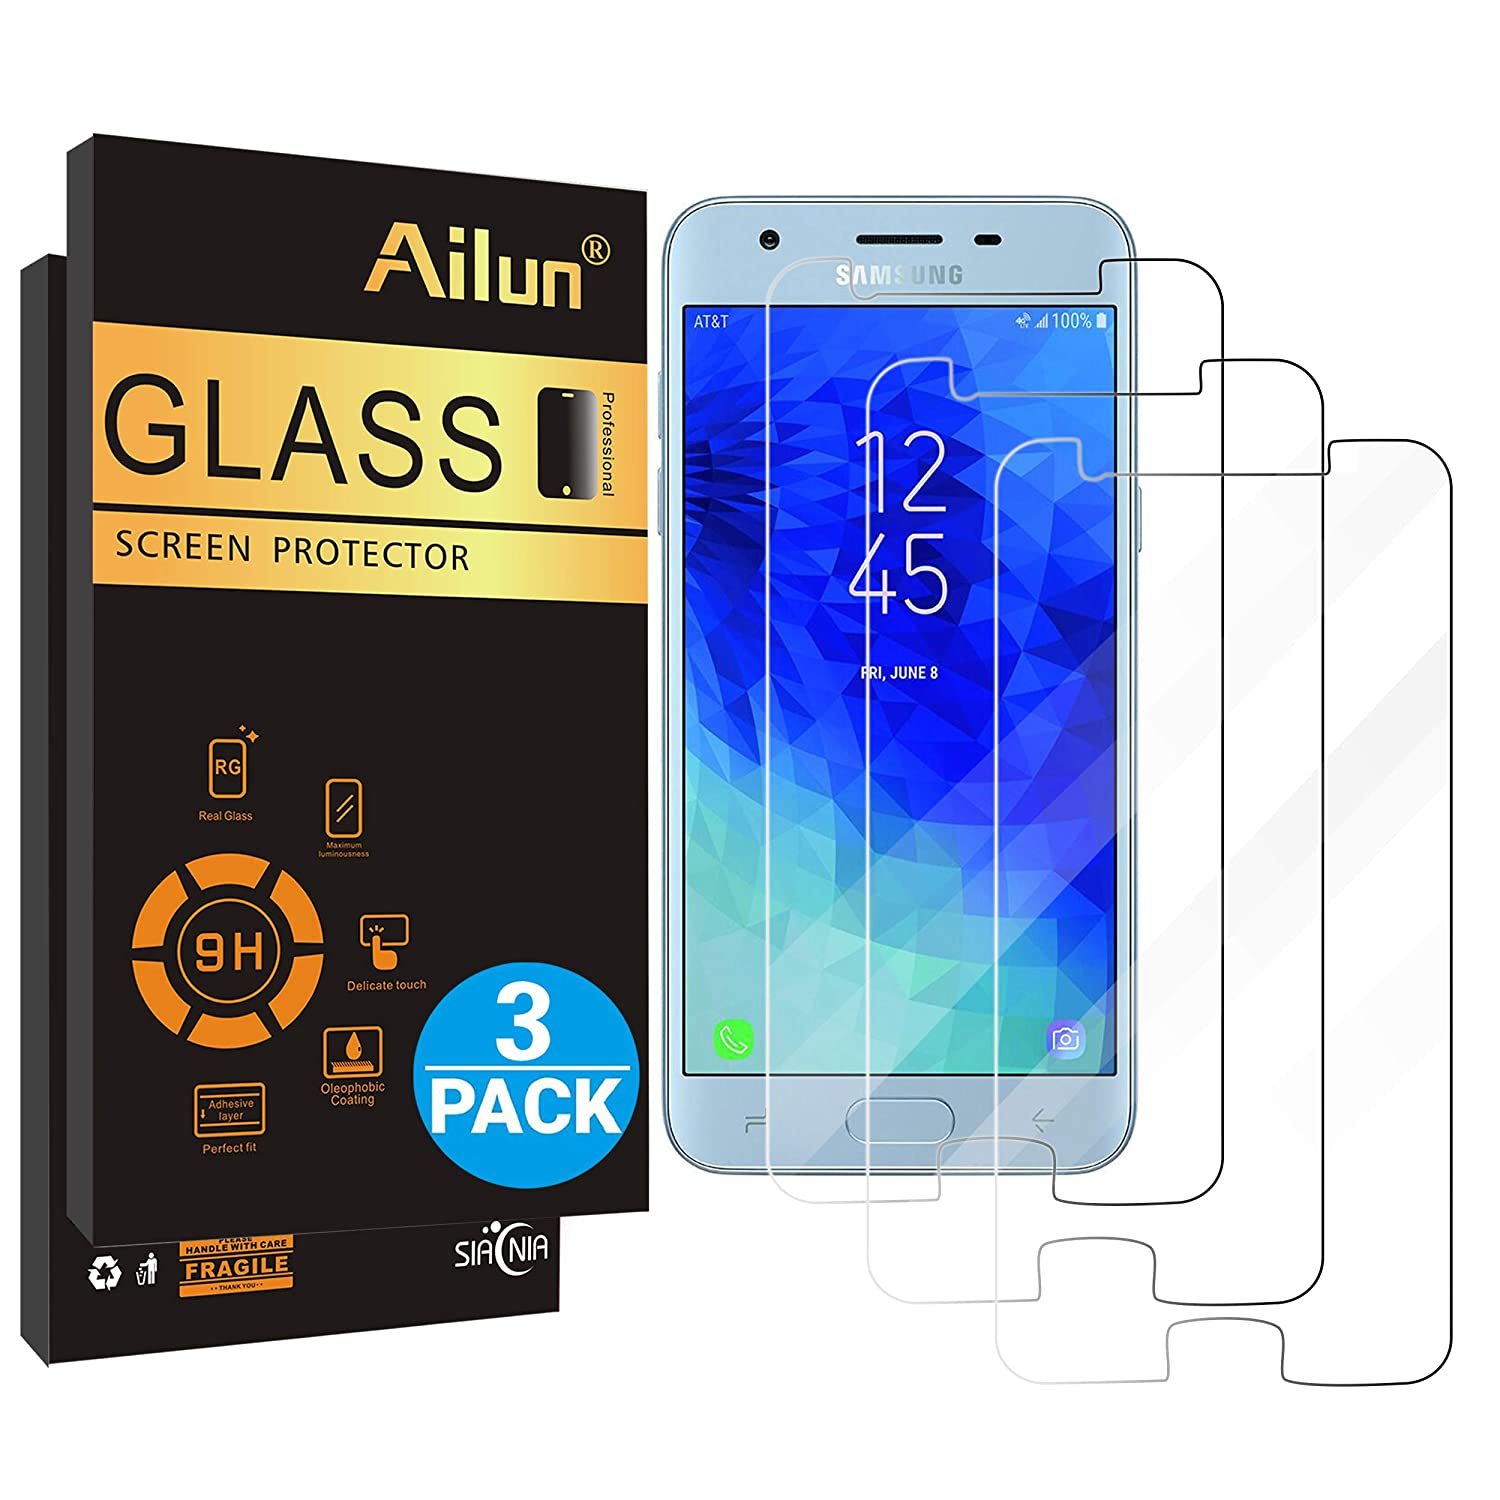 Primary image for Ailun Screen Protector for Galaxy J3 2018 3Pack Tempered Glass for Samsung Galax